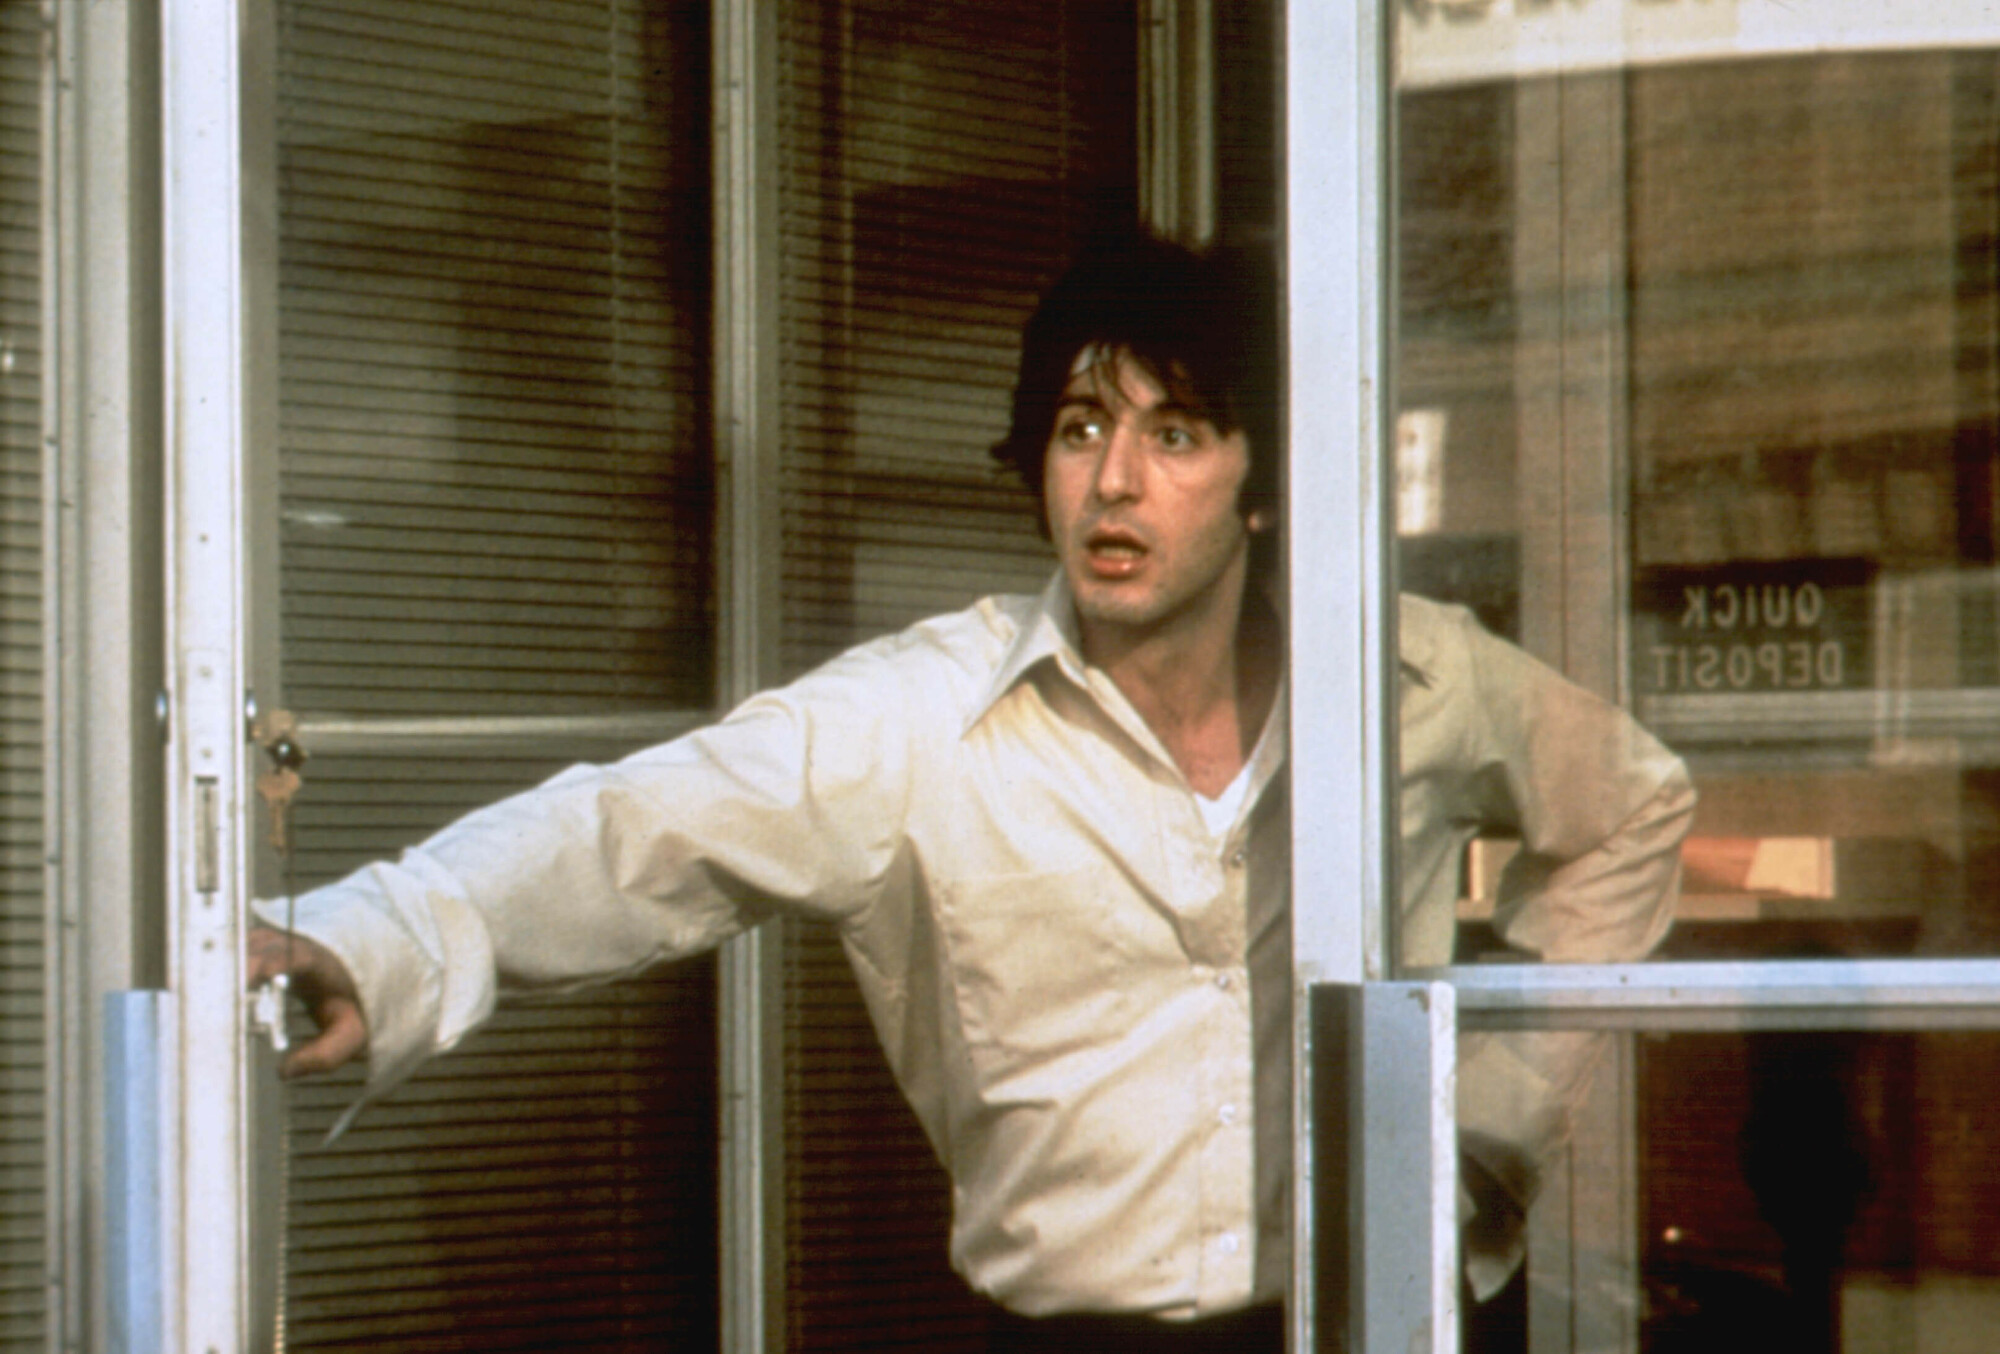 Al Pacino is on the brink in "Dog Day Afternoon."